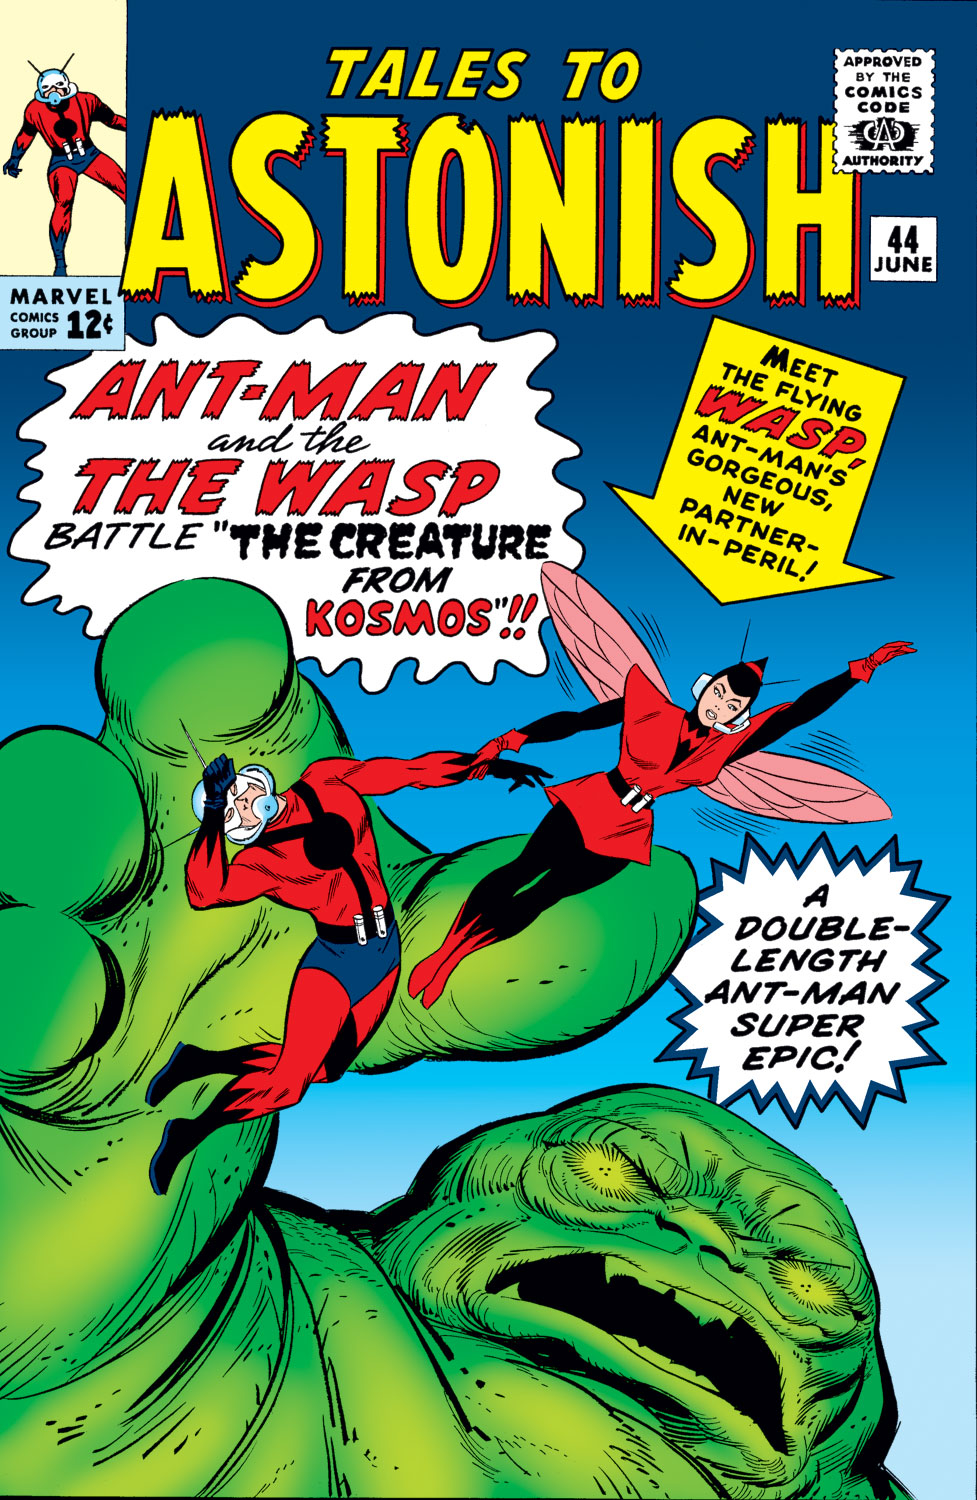 Read online Tales to Astonish (1959) comic -  Issue #44 - 1